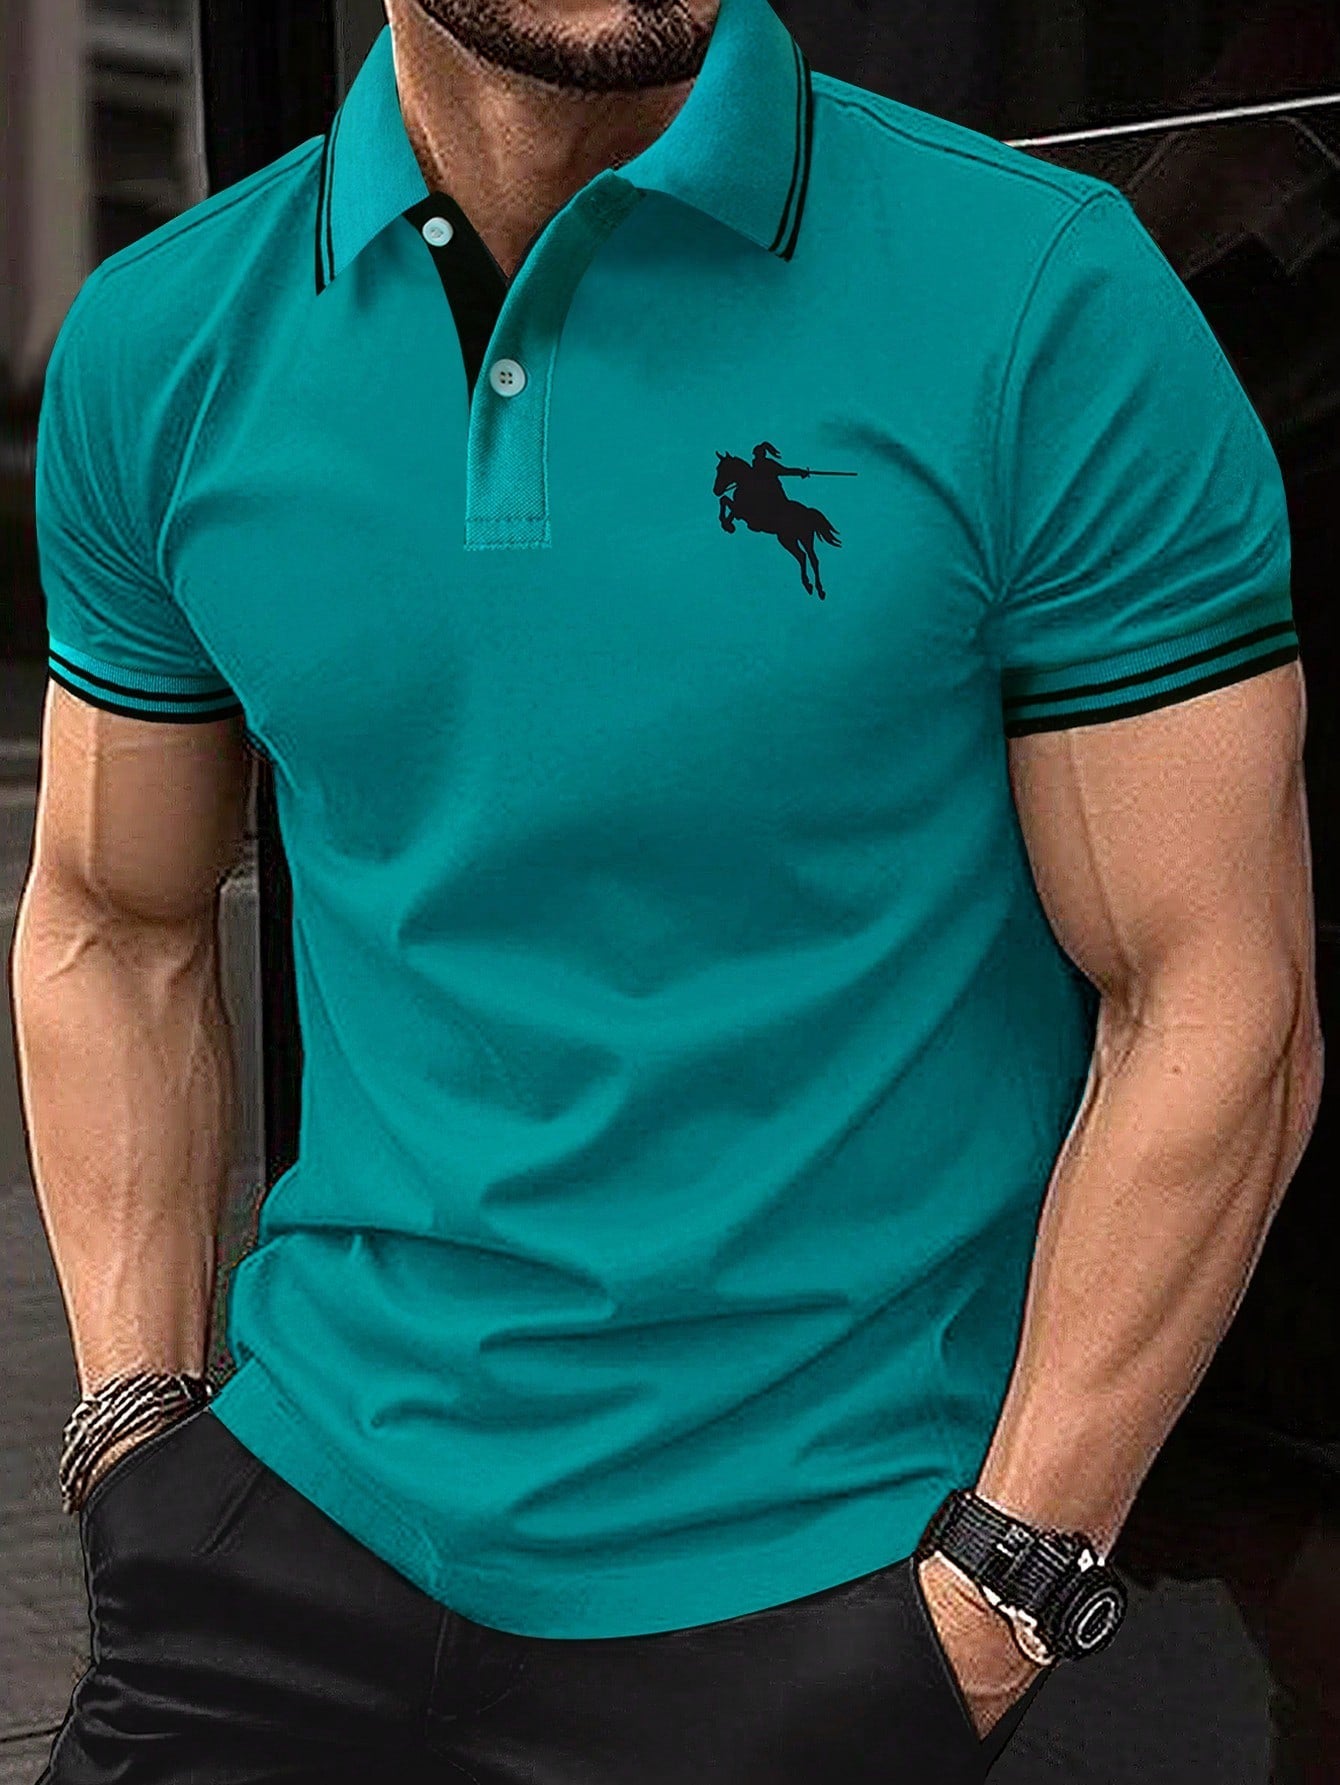 Horse Print Blue Polo Shirt for Men with Striped Trim